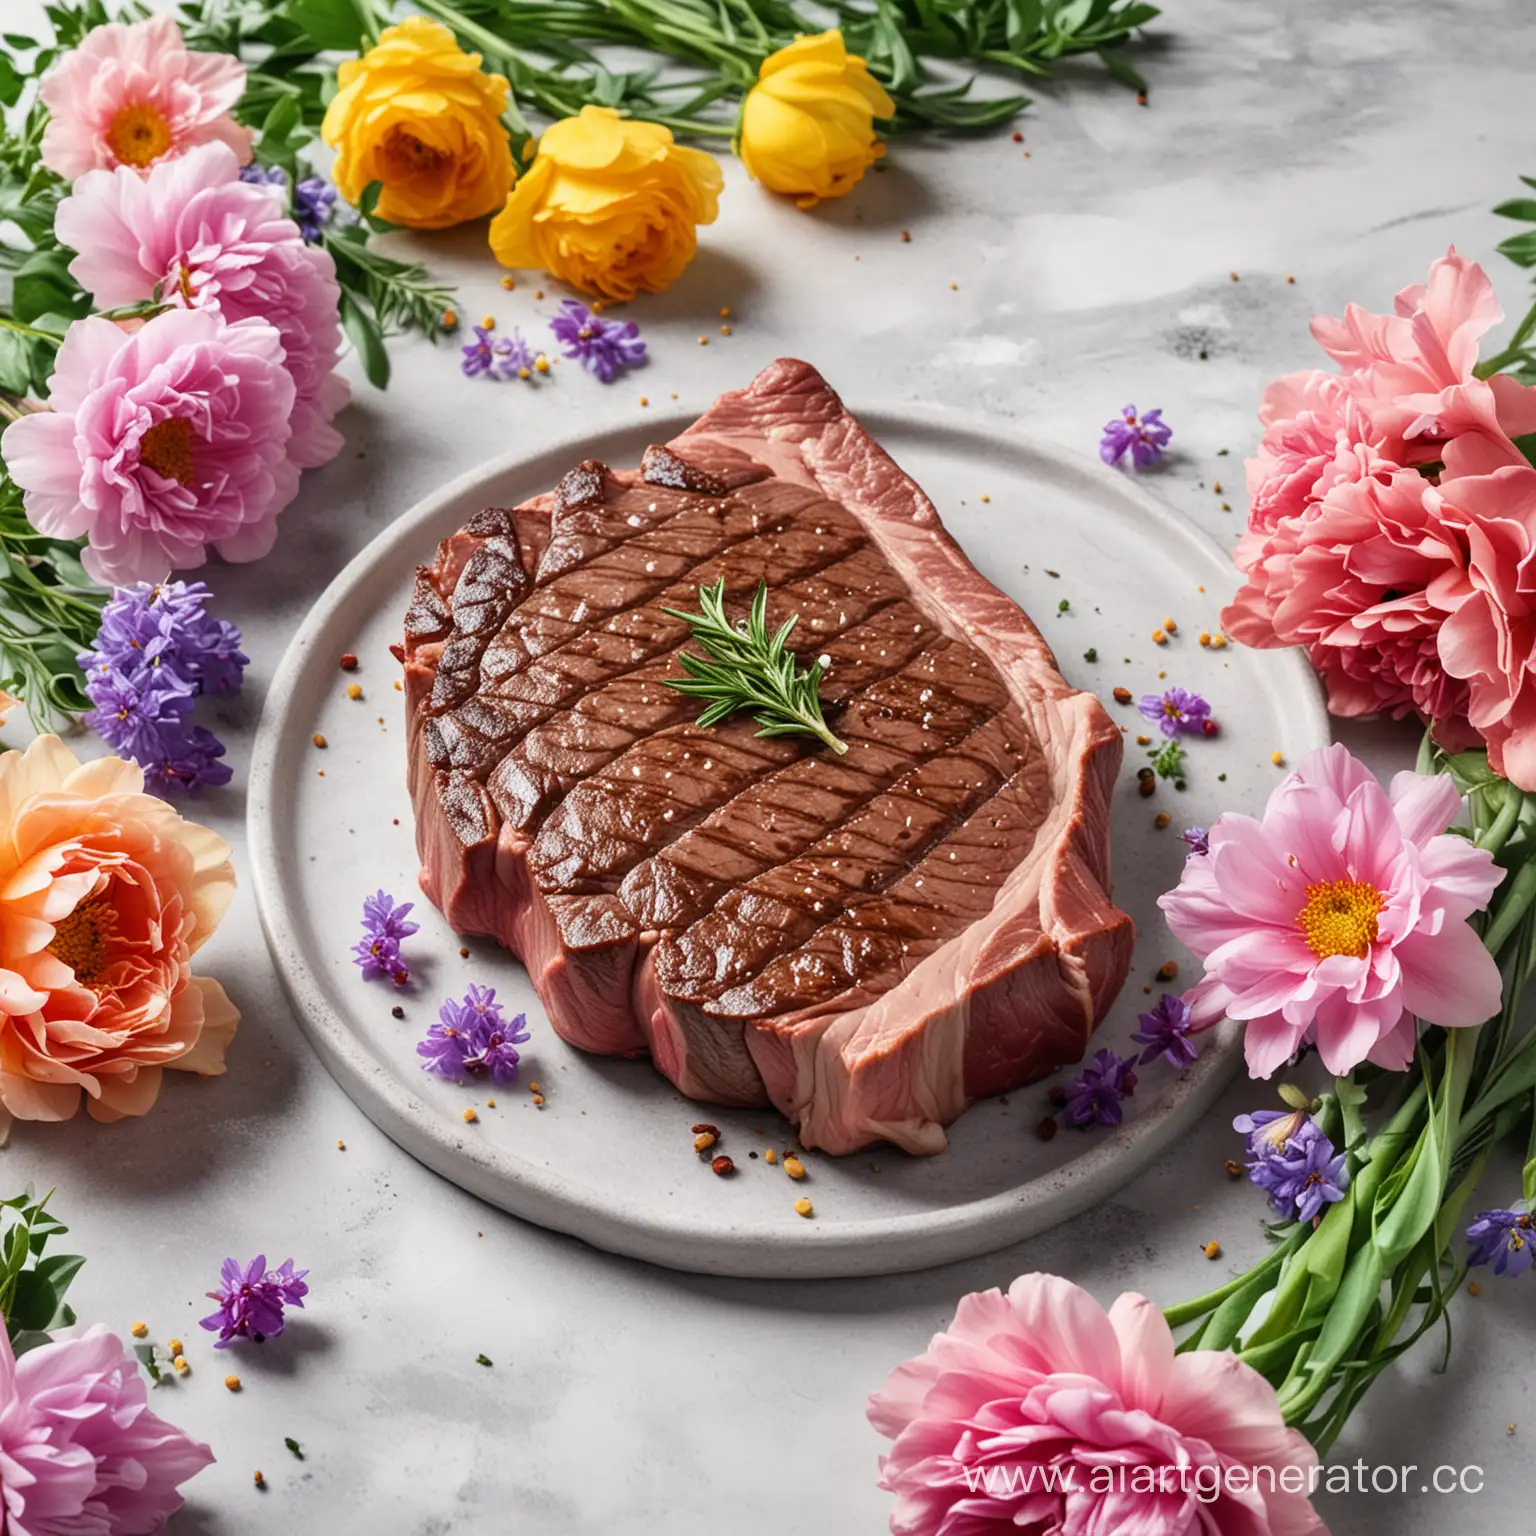 Juicy-Marbled-Steak-with-Vibrant-Flowers-Signifying-Spring-Awakening